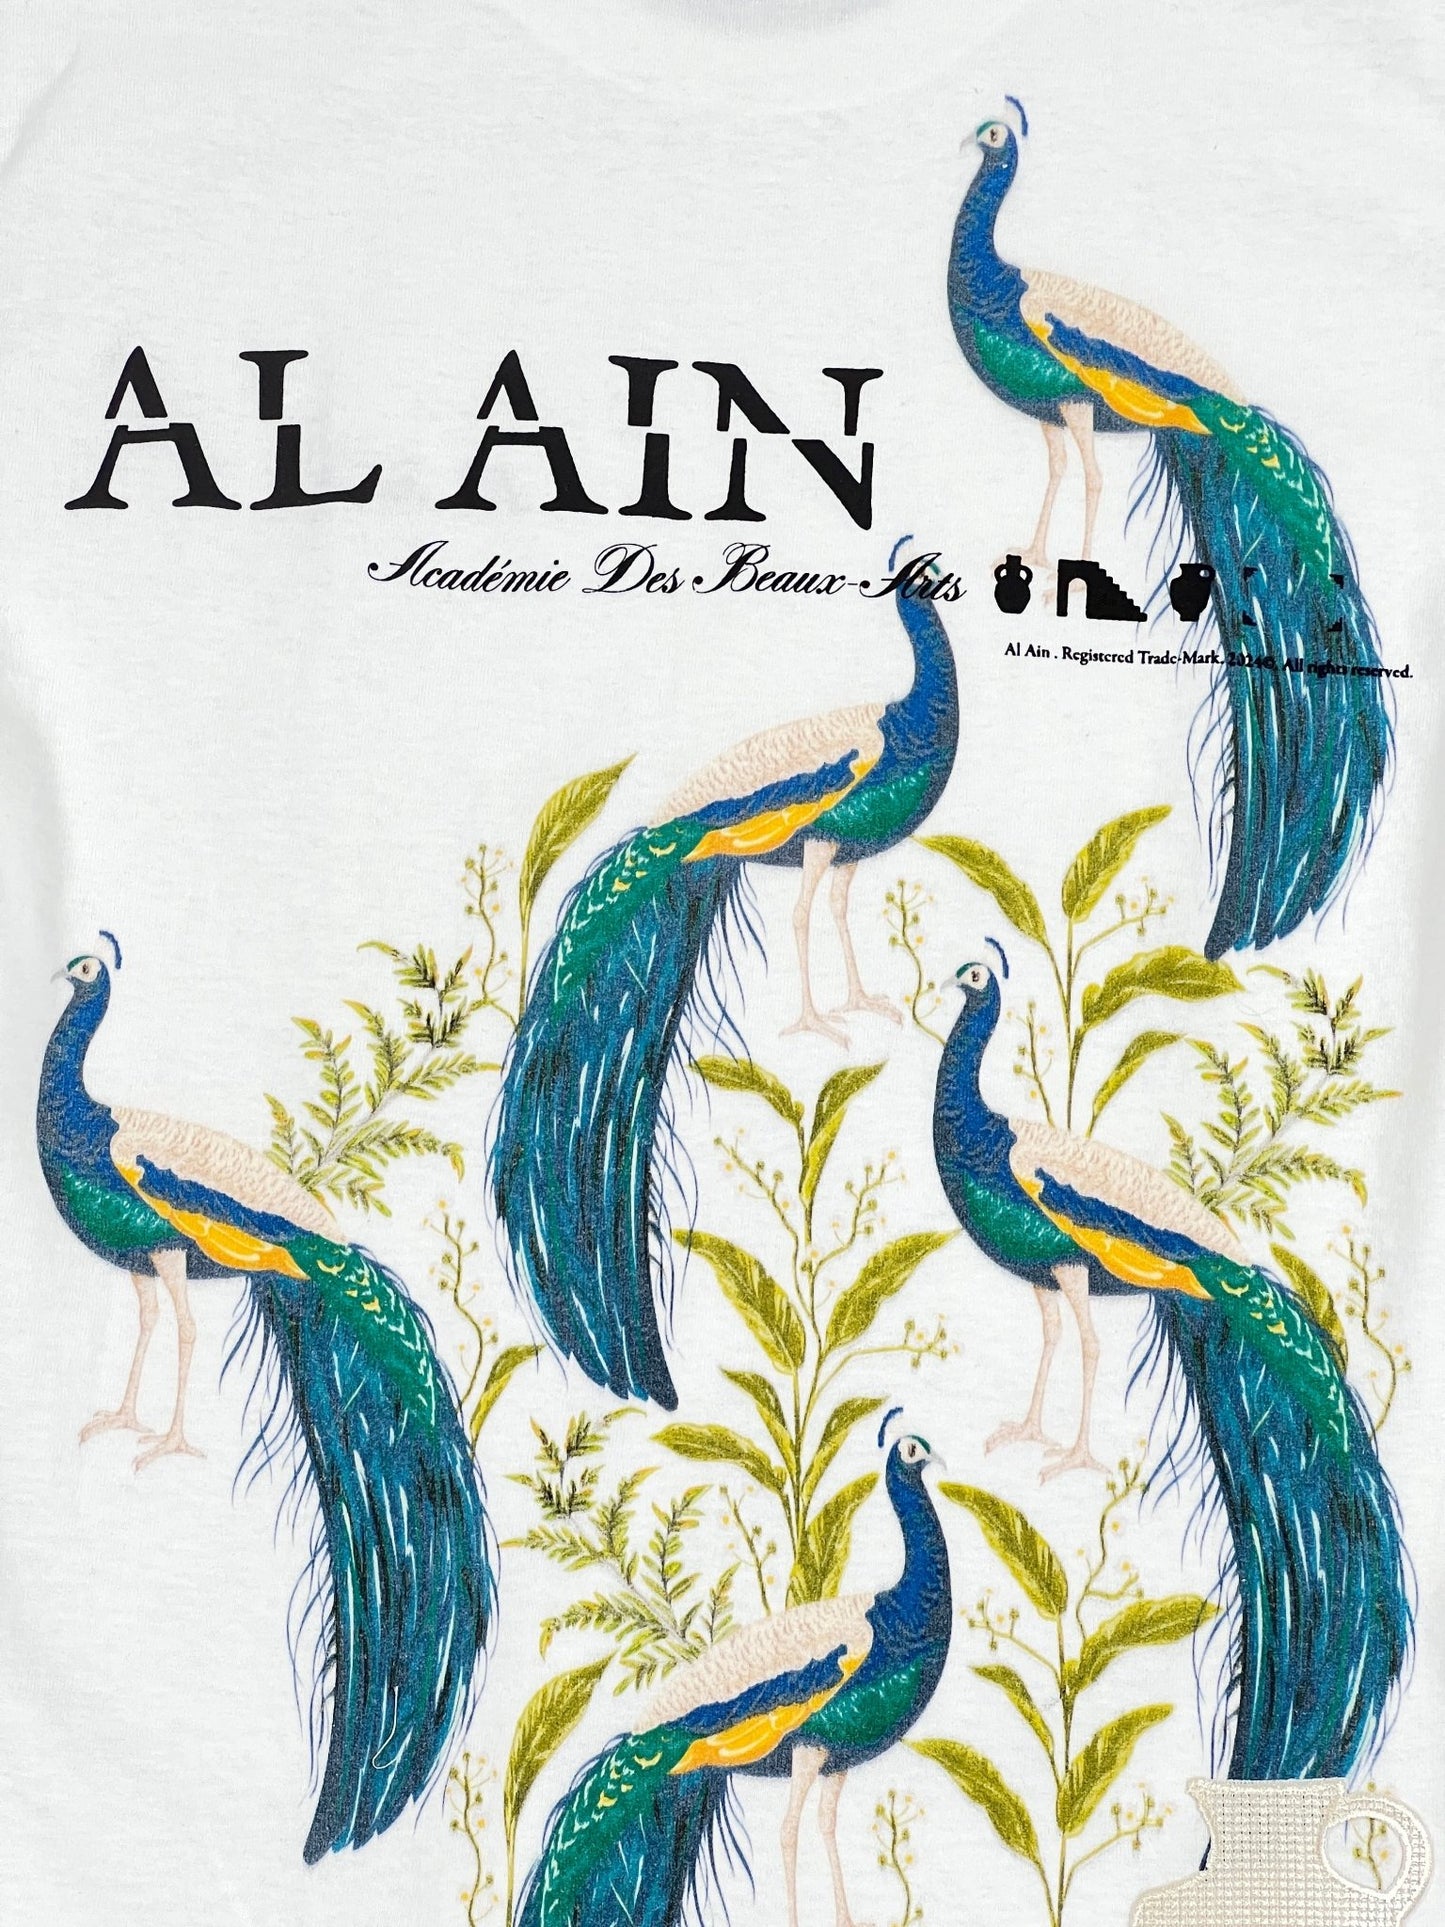 Illustration of four peacocks with vibrant blue and green feathers surrounded by green foliage, embroidered brand name "AL AIN AL AIN AMHX S121 PEACOCK BLANC" in stylized fonts, perfect for a graphic t-shirt.